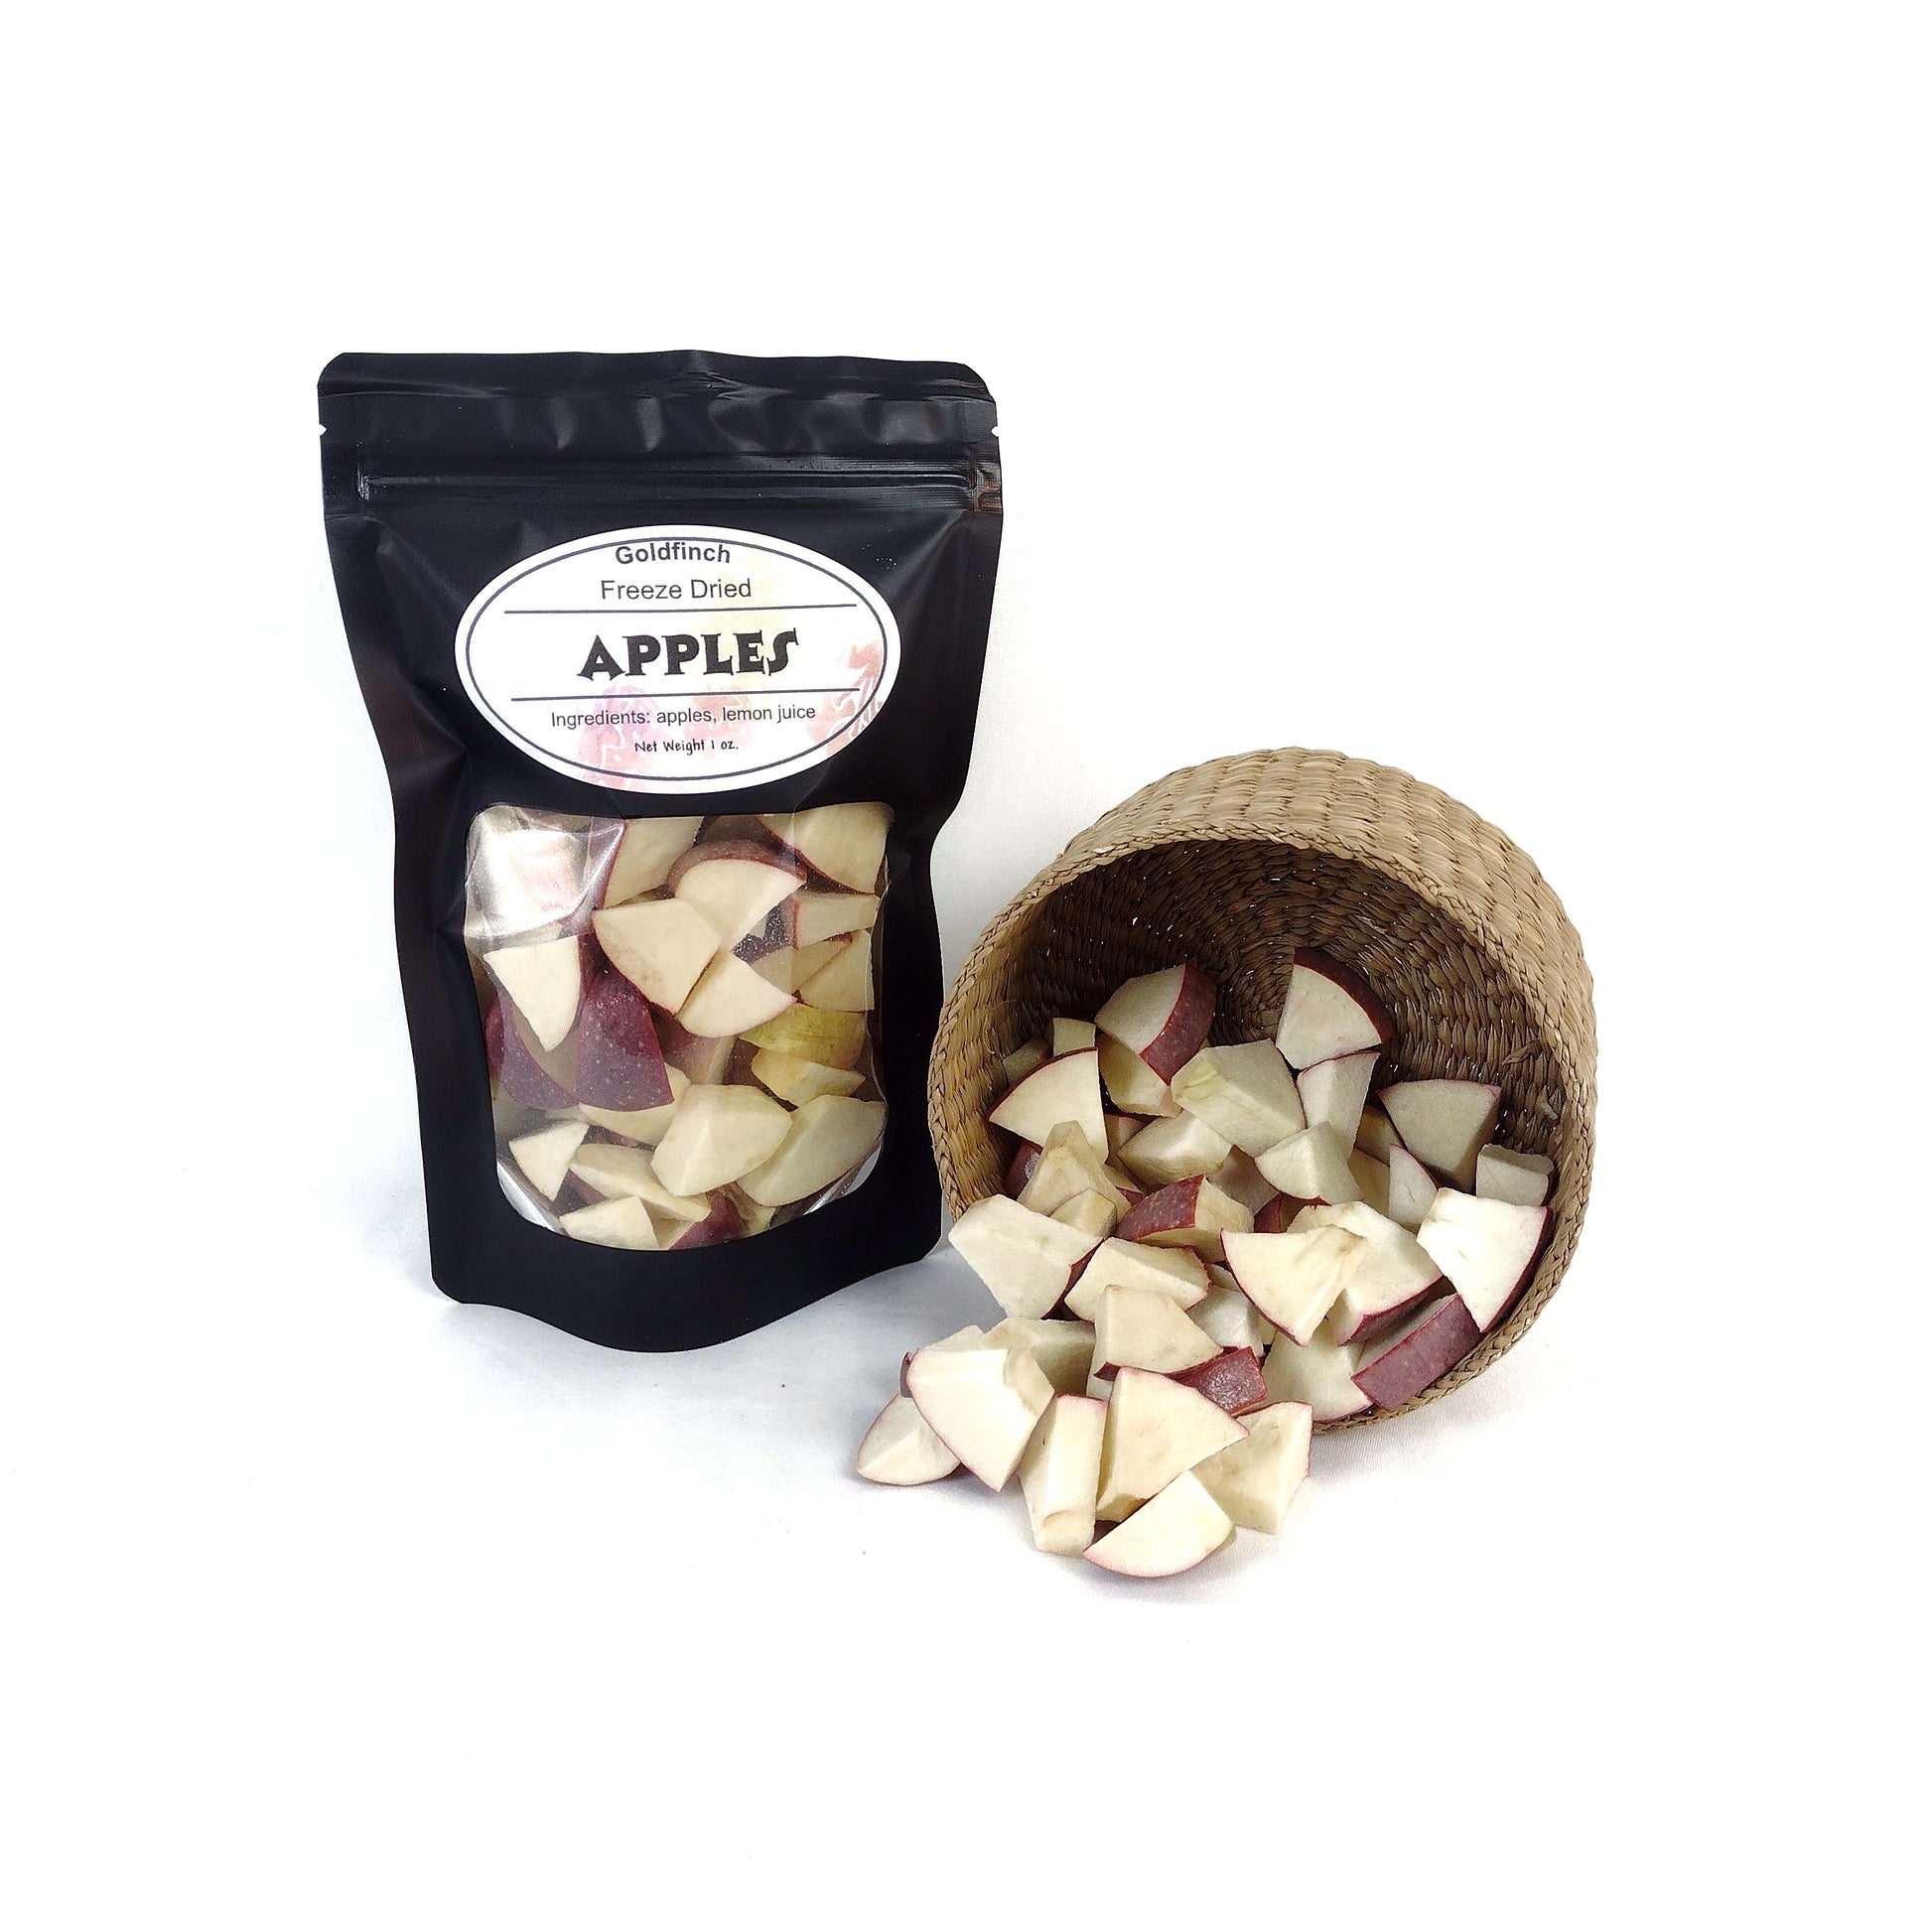 Snack Awhile freeze dried apples spilling from a basket